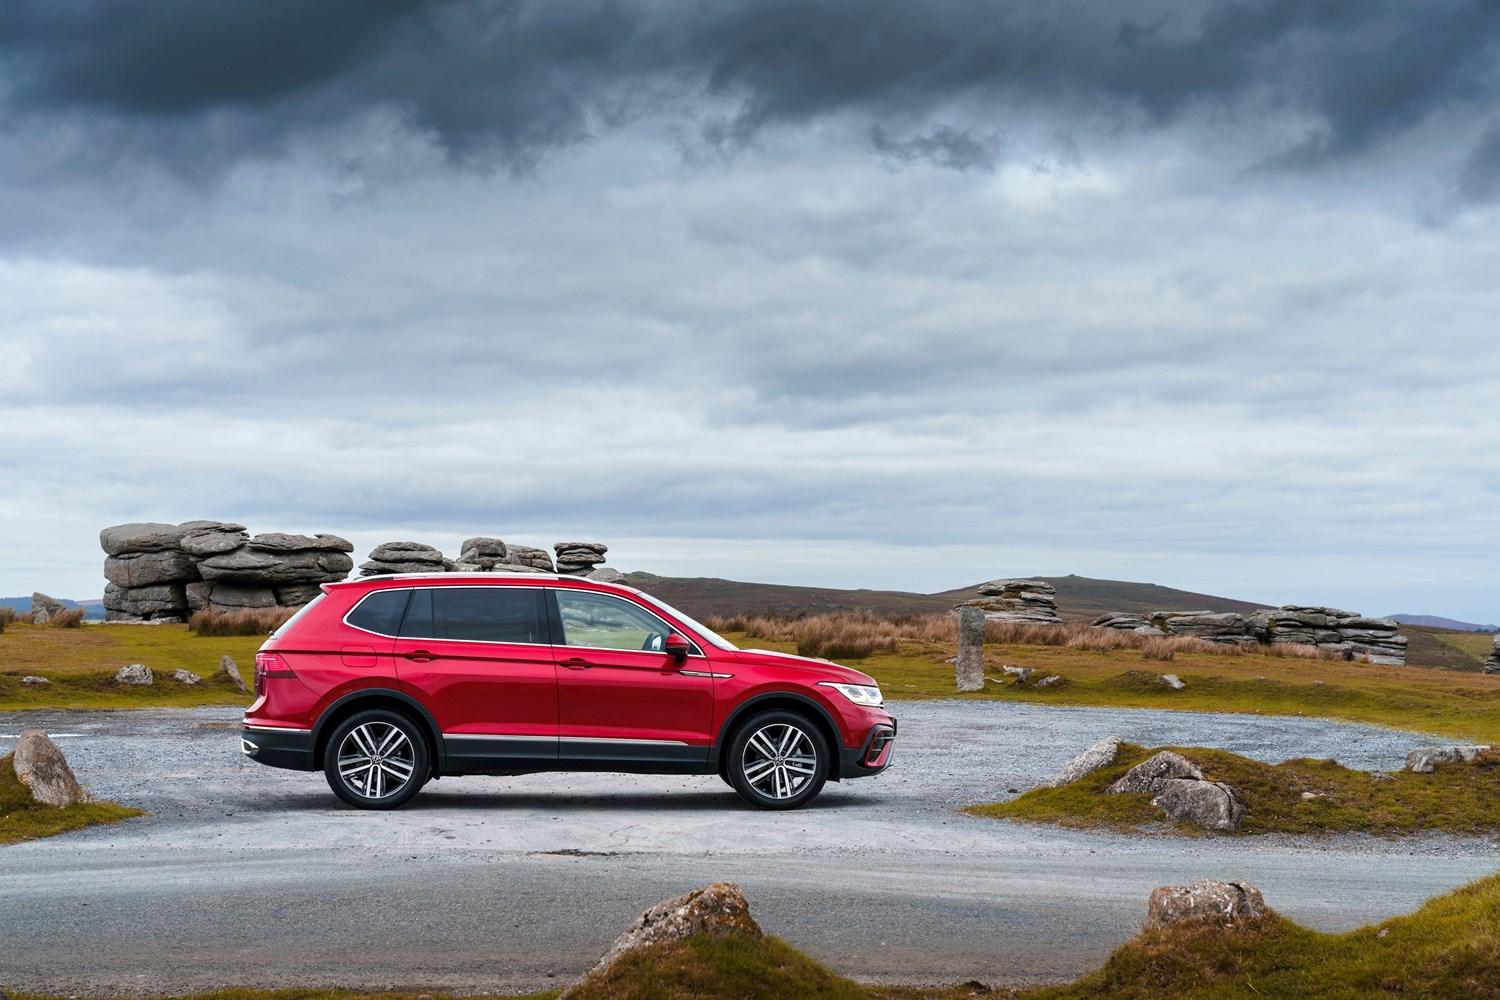 Side view of the new Volkswagen Tiguan Allspace in red, parked in car park with stone wall